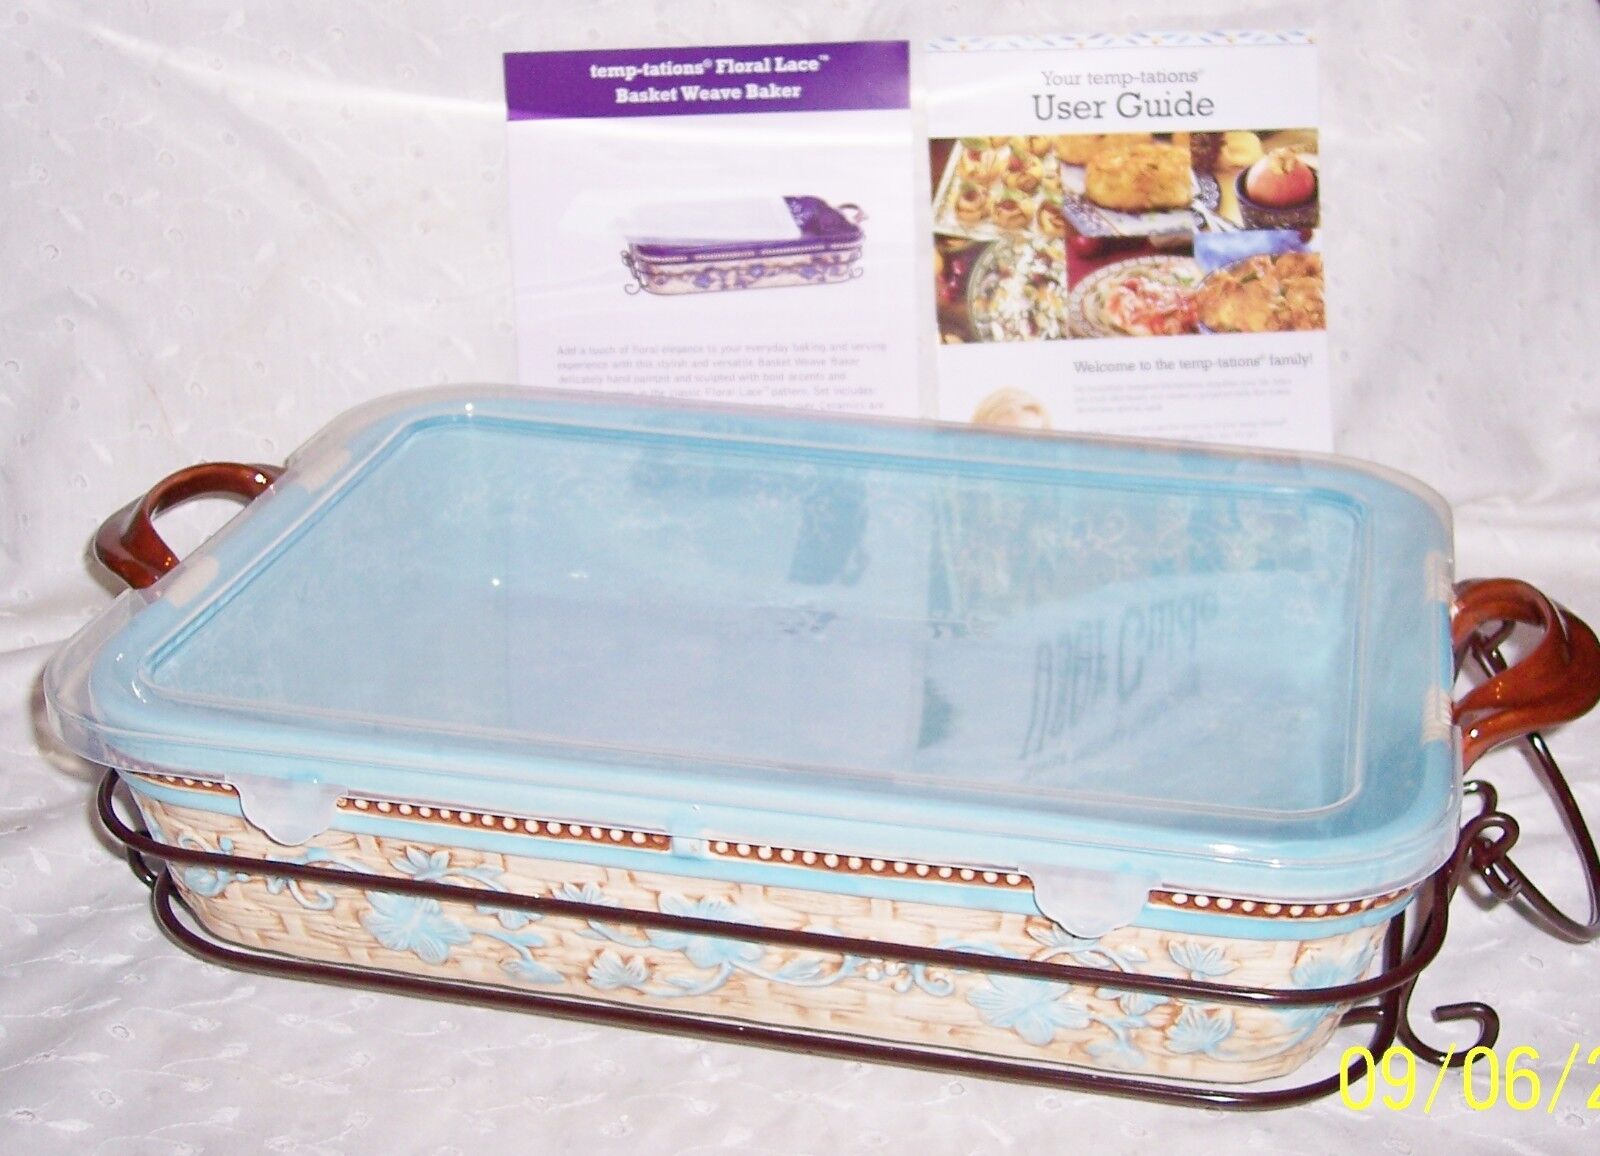 TEMPATIONS OLD WORLD 4 QT BLUE SQUARE BAKER TRIVET RACK WITH LID NEW BY TARA